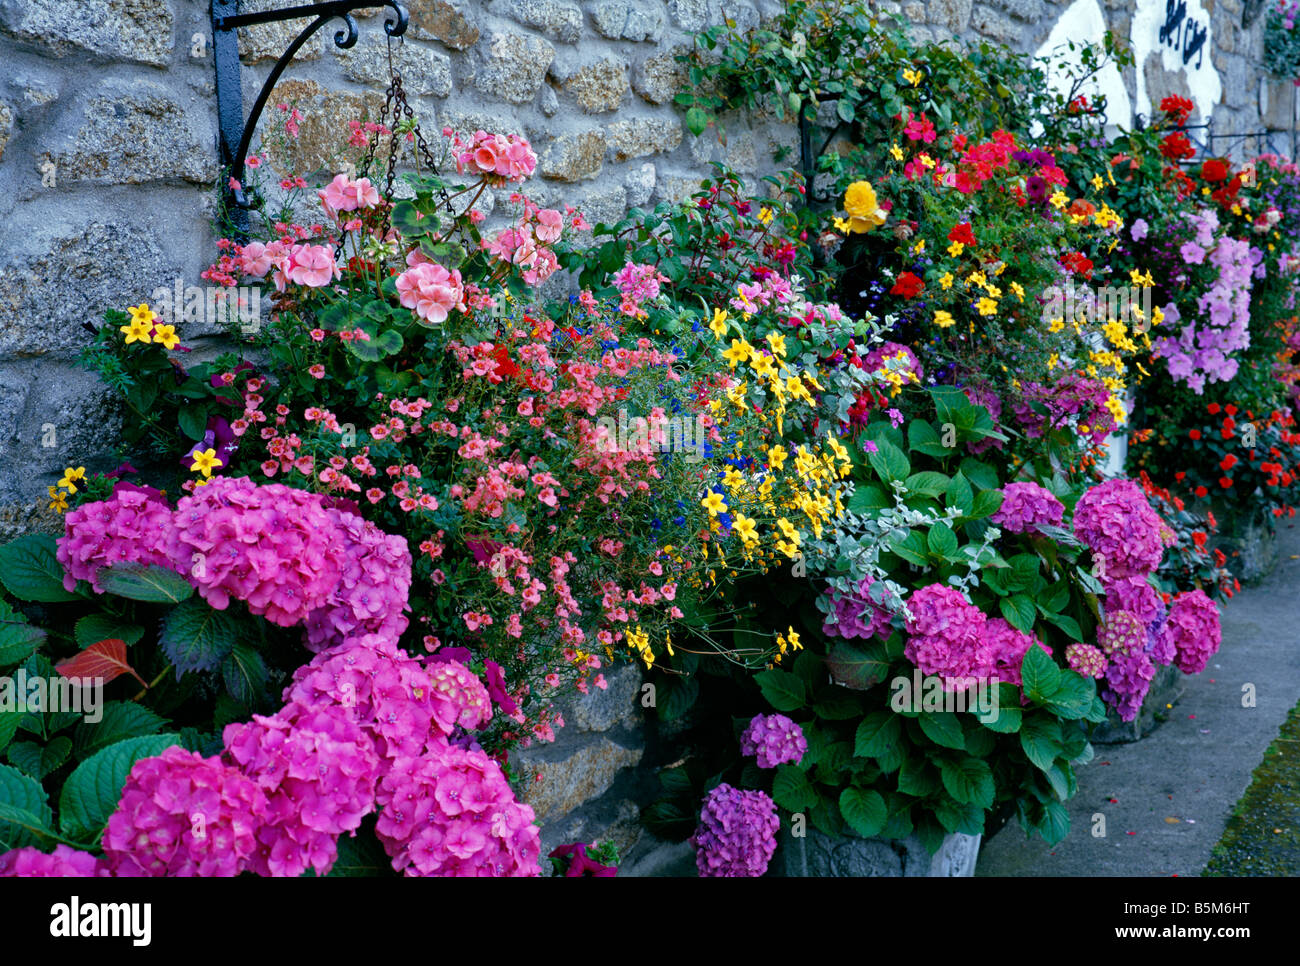 Cottage with colourful containers and hanging baskets of flowers Stock Photo